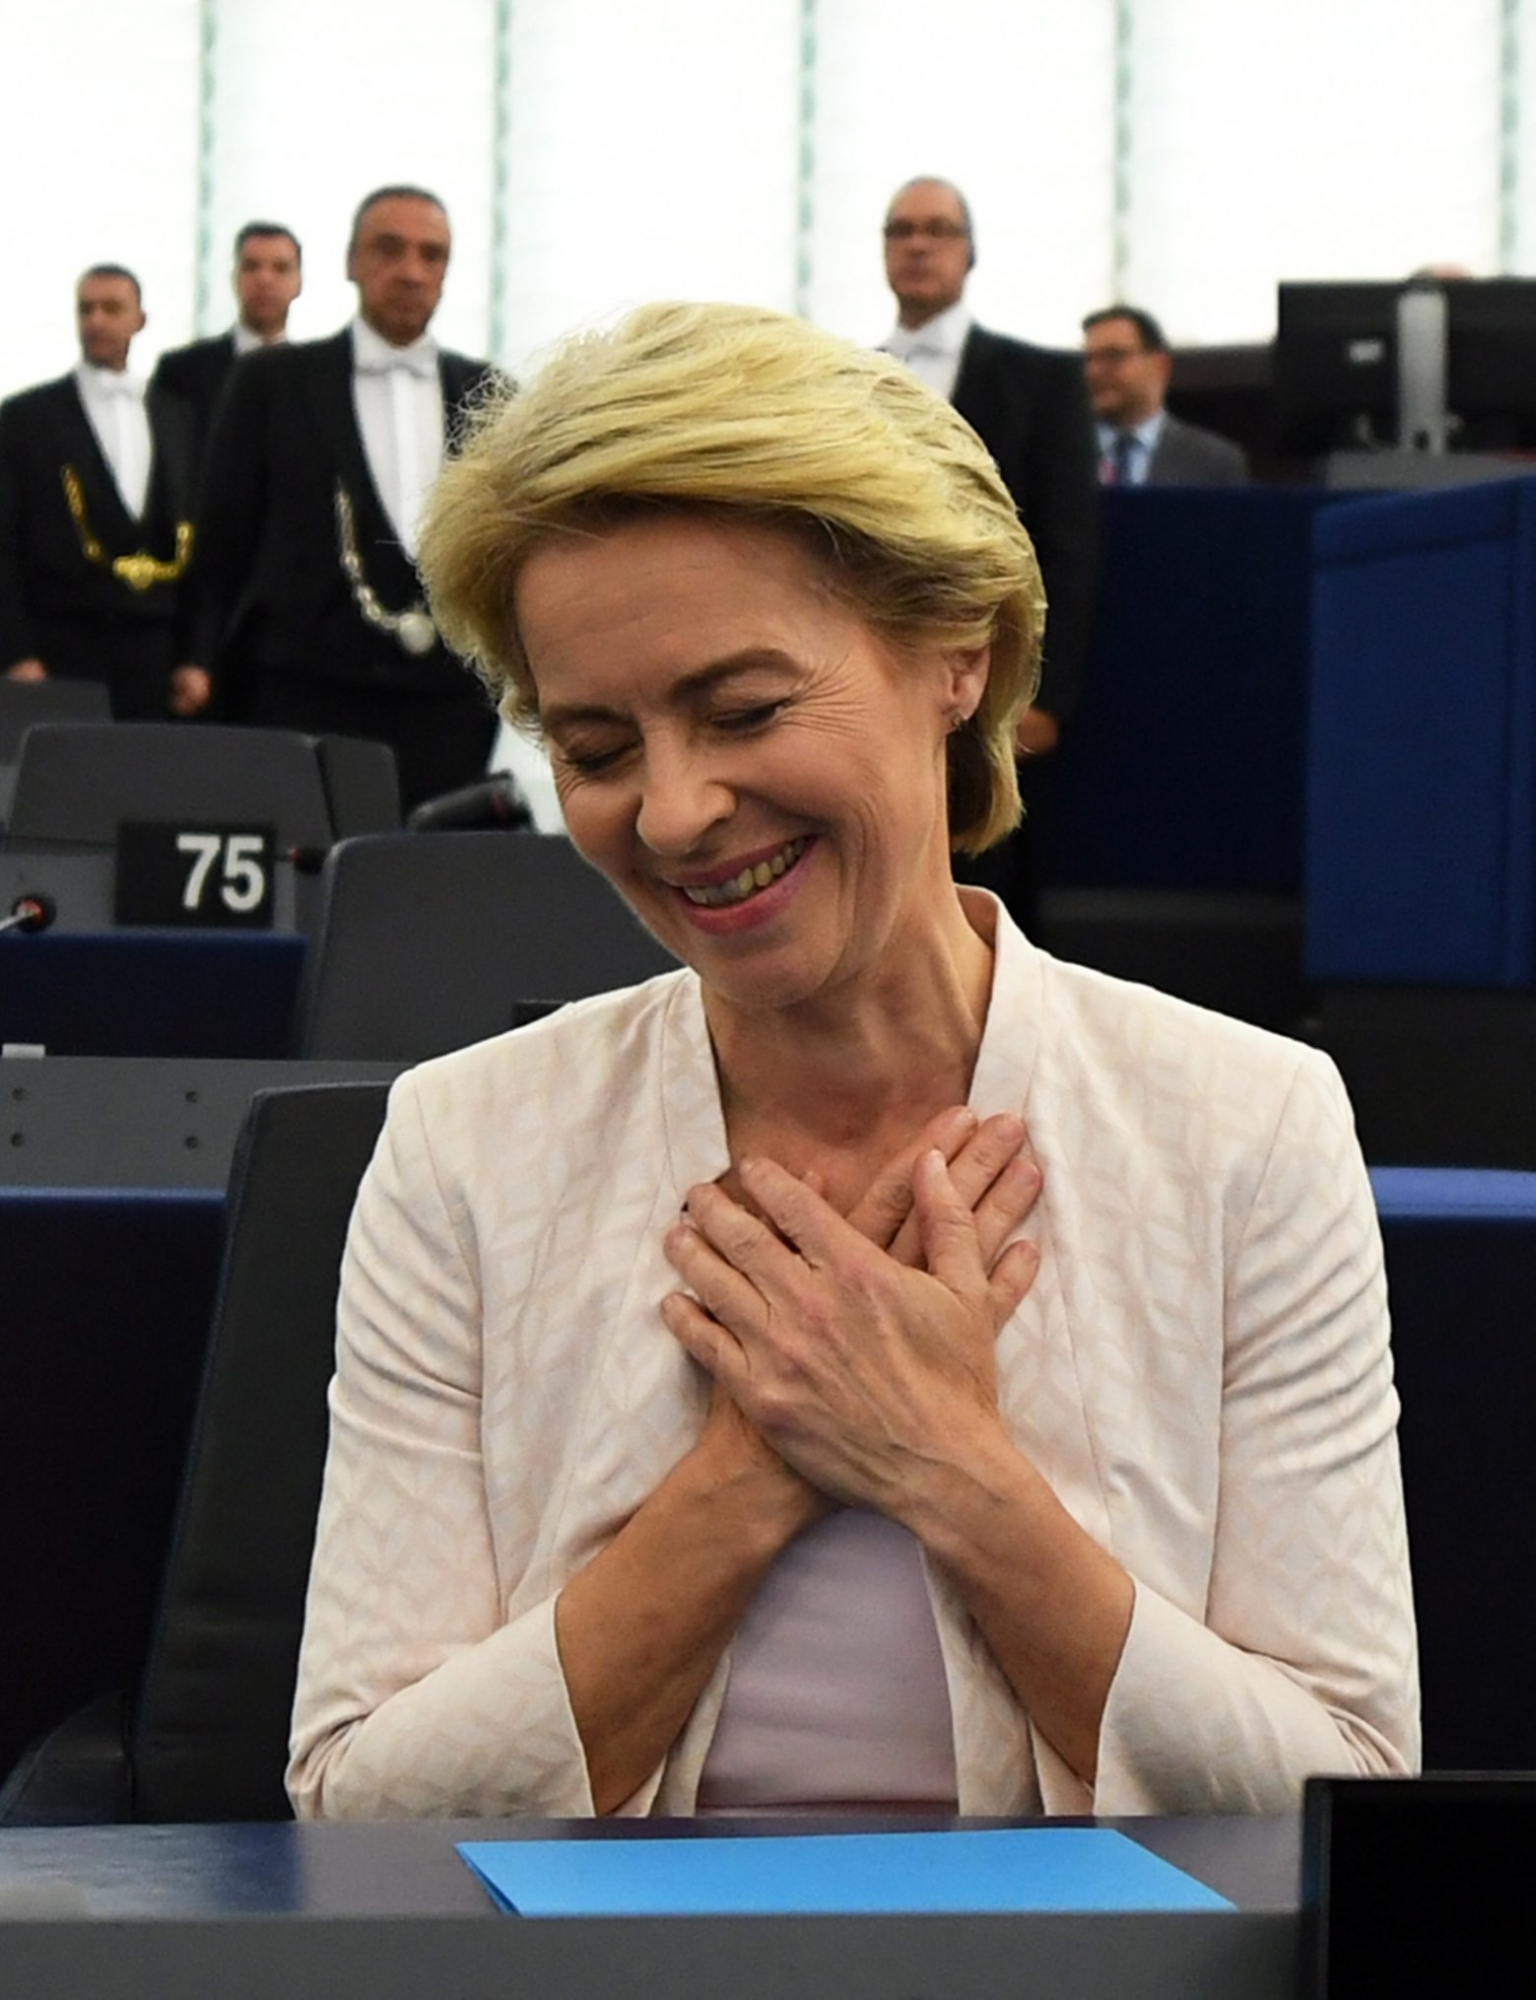 epa07720943 German Defense Minister Ursula von der Leyen and nominated President of the European Commission reacts after a vote at the European Parliament in Strasbourg, France, 16 July 2019.   European Parliament voted in favor of Ursula von der Leyen as the new President of the European Commission.  EPA/PATRICK SEEGER FRANCE EU EUROPEAN PARLIAMEN